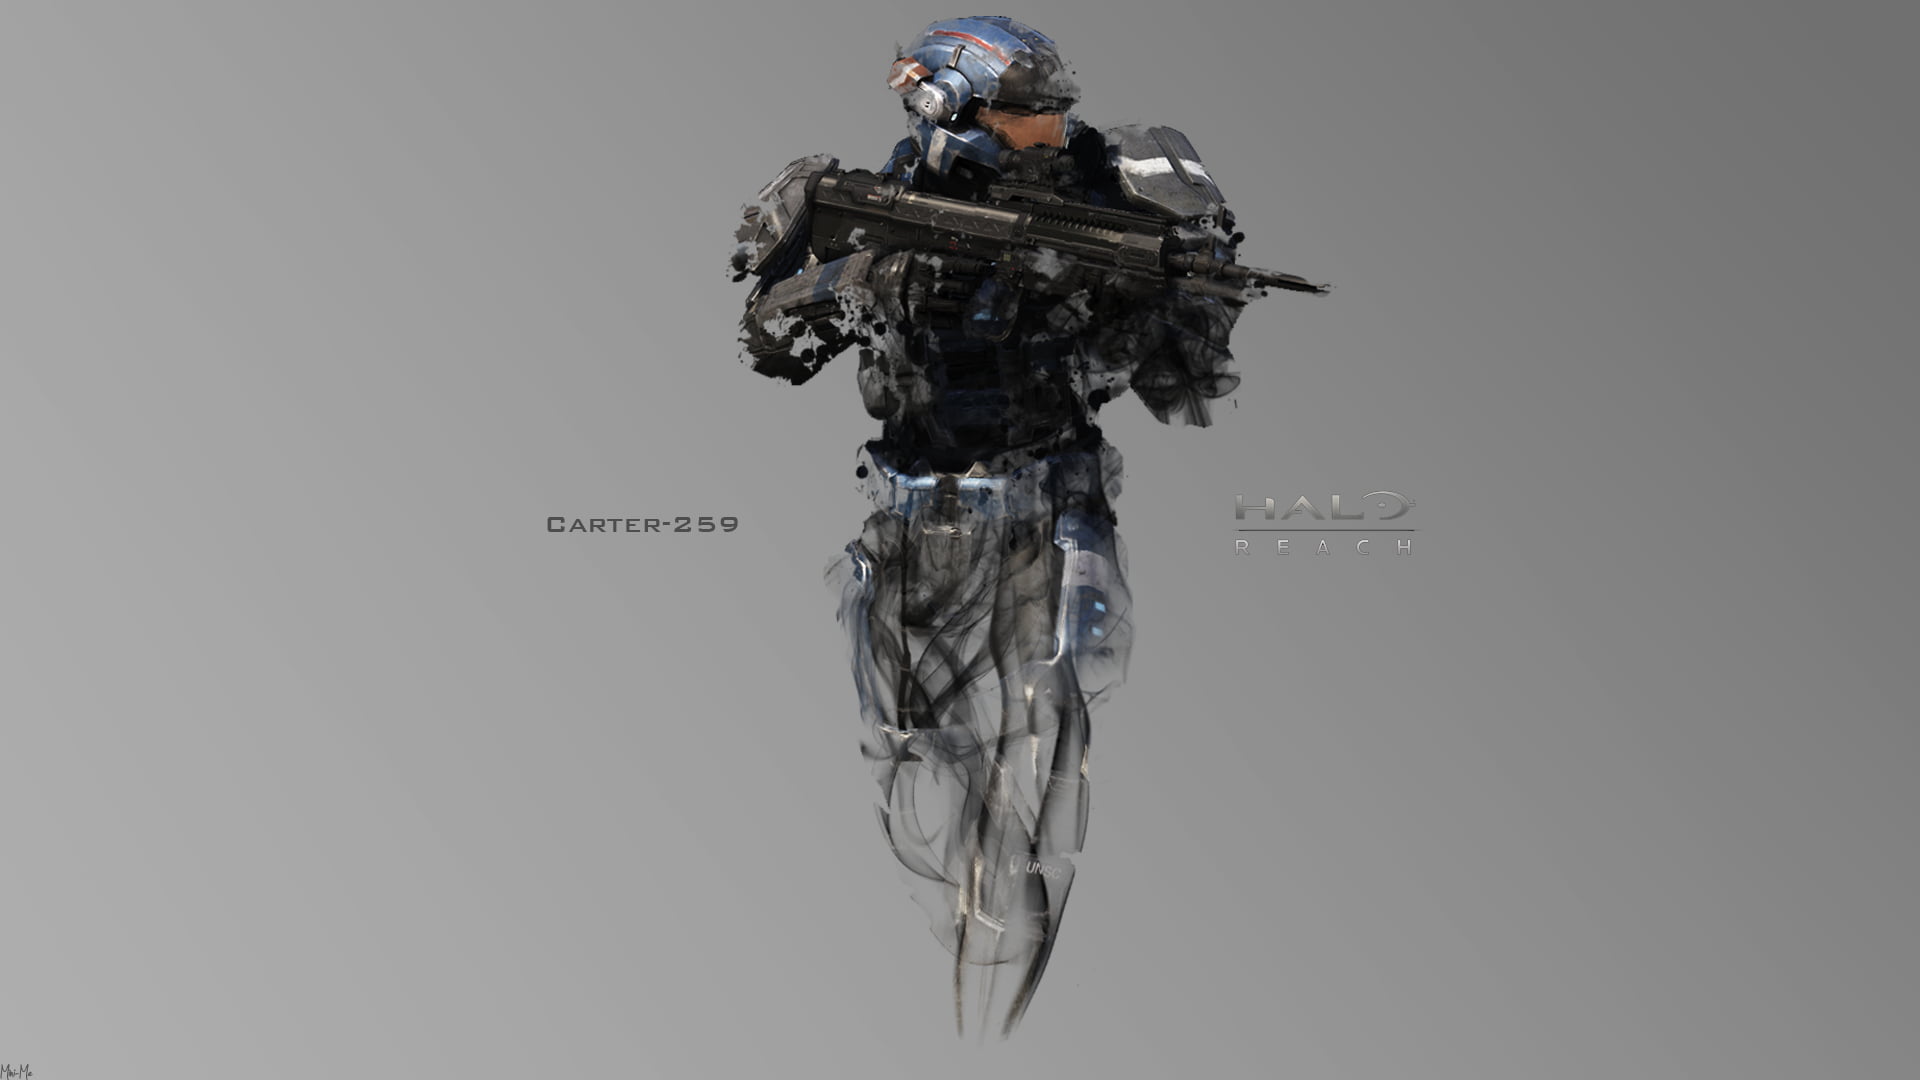 Halo game cover, Carter-A259, Halo Reach, war, armed Forces, weapon